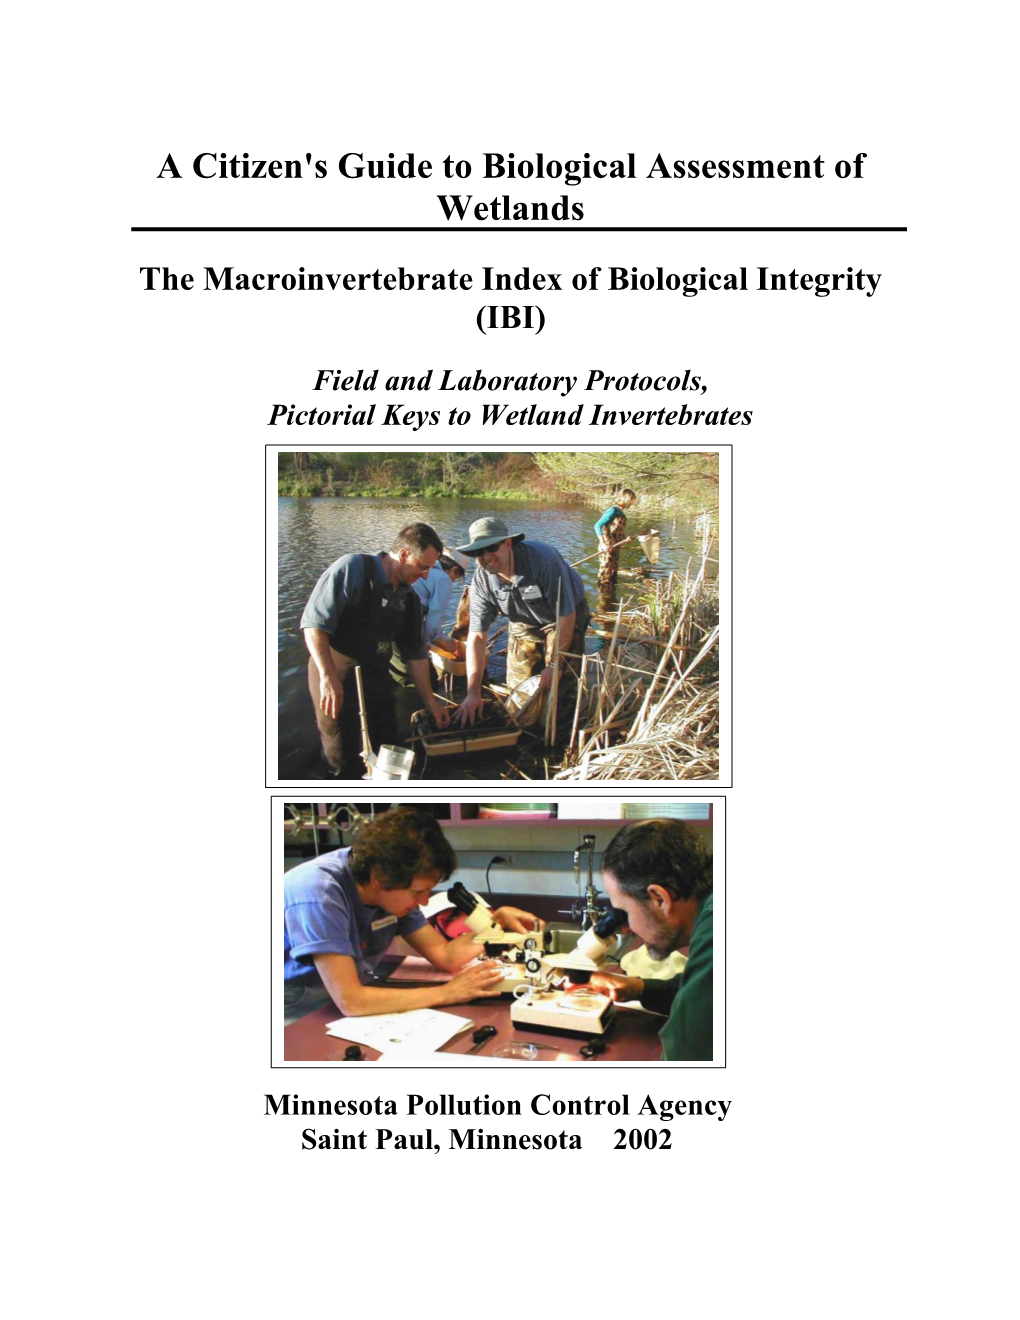 A Citizen's Guide to Biological Assessment of Wetlands: the Macroinvertebrate Index of Biological Integrity (IBI)